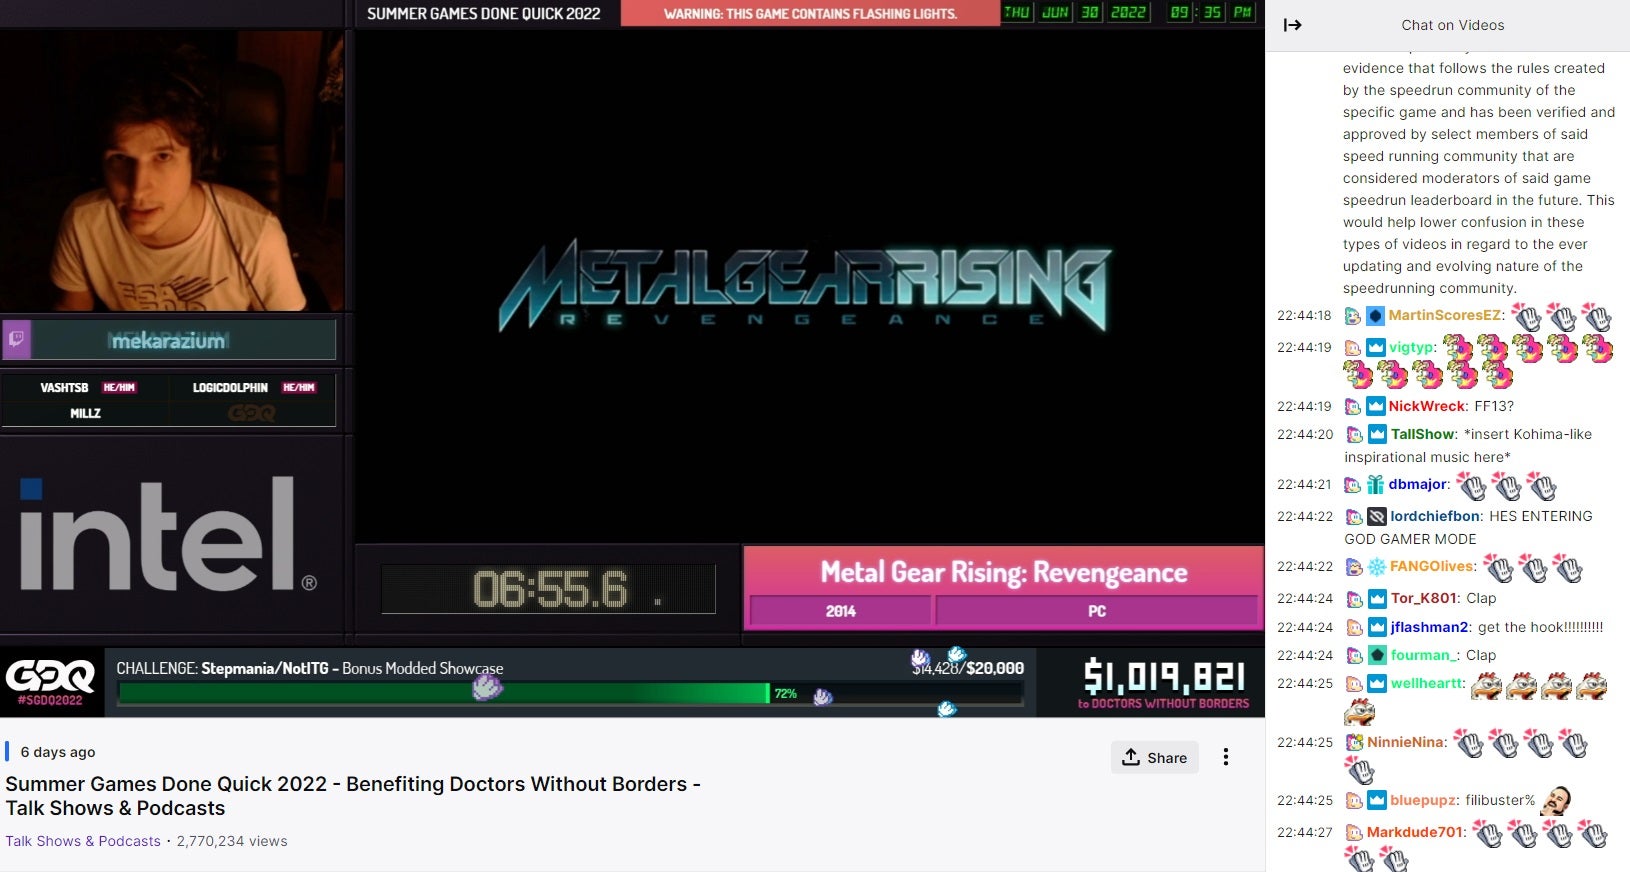 Metal Gear Speedrunner Reveals He Faked ‘Live’ World Record, Claims It’s A ‘Puzzle’